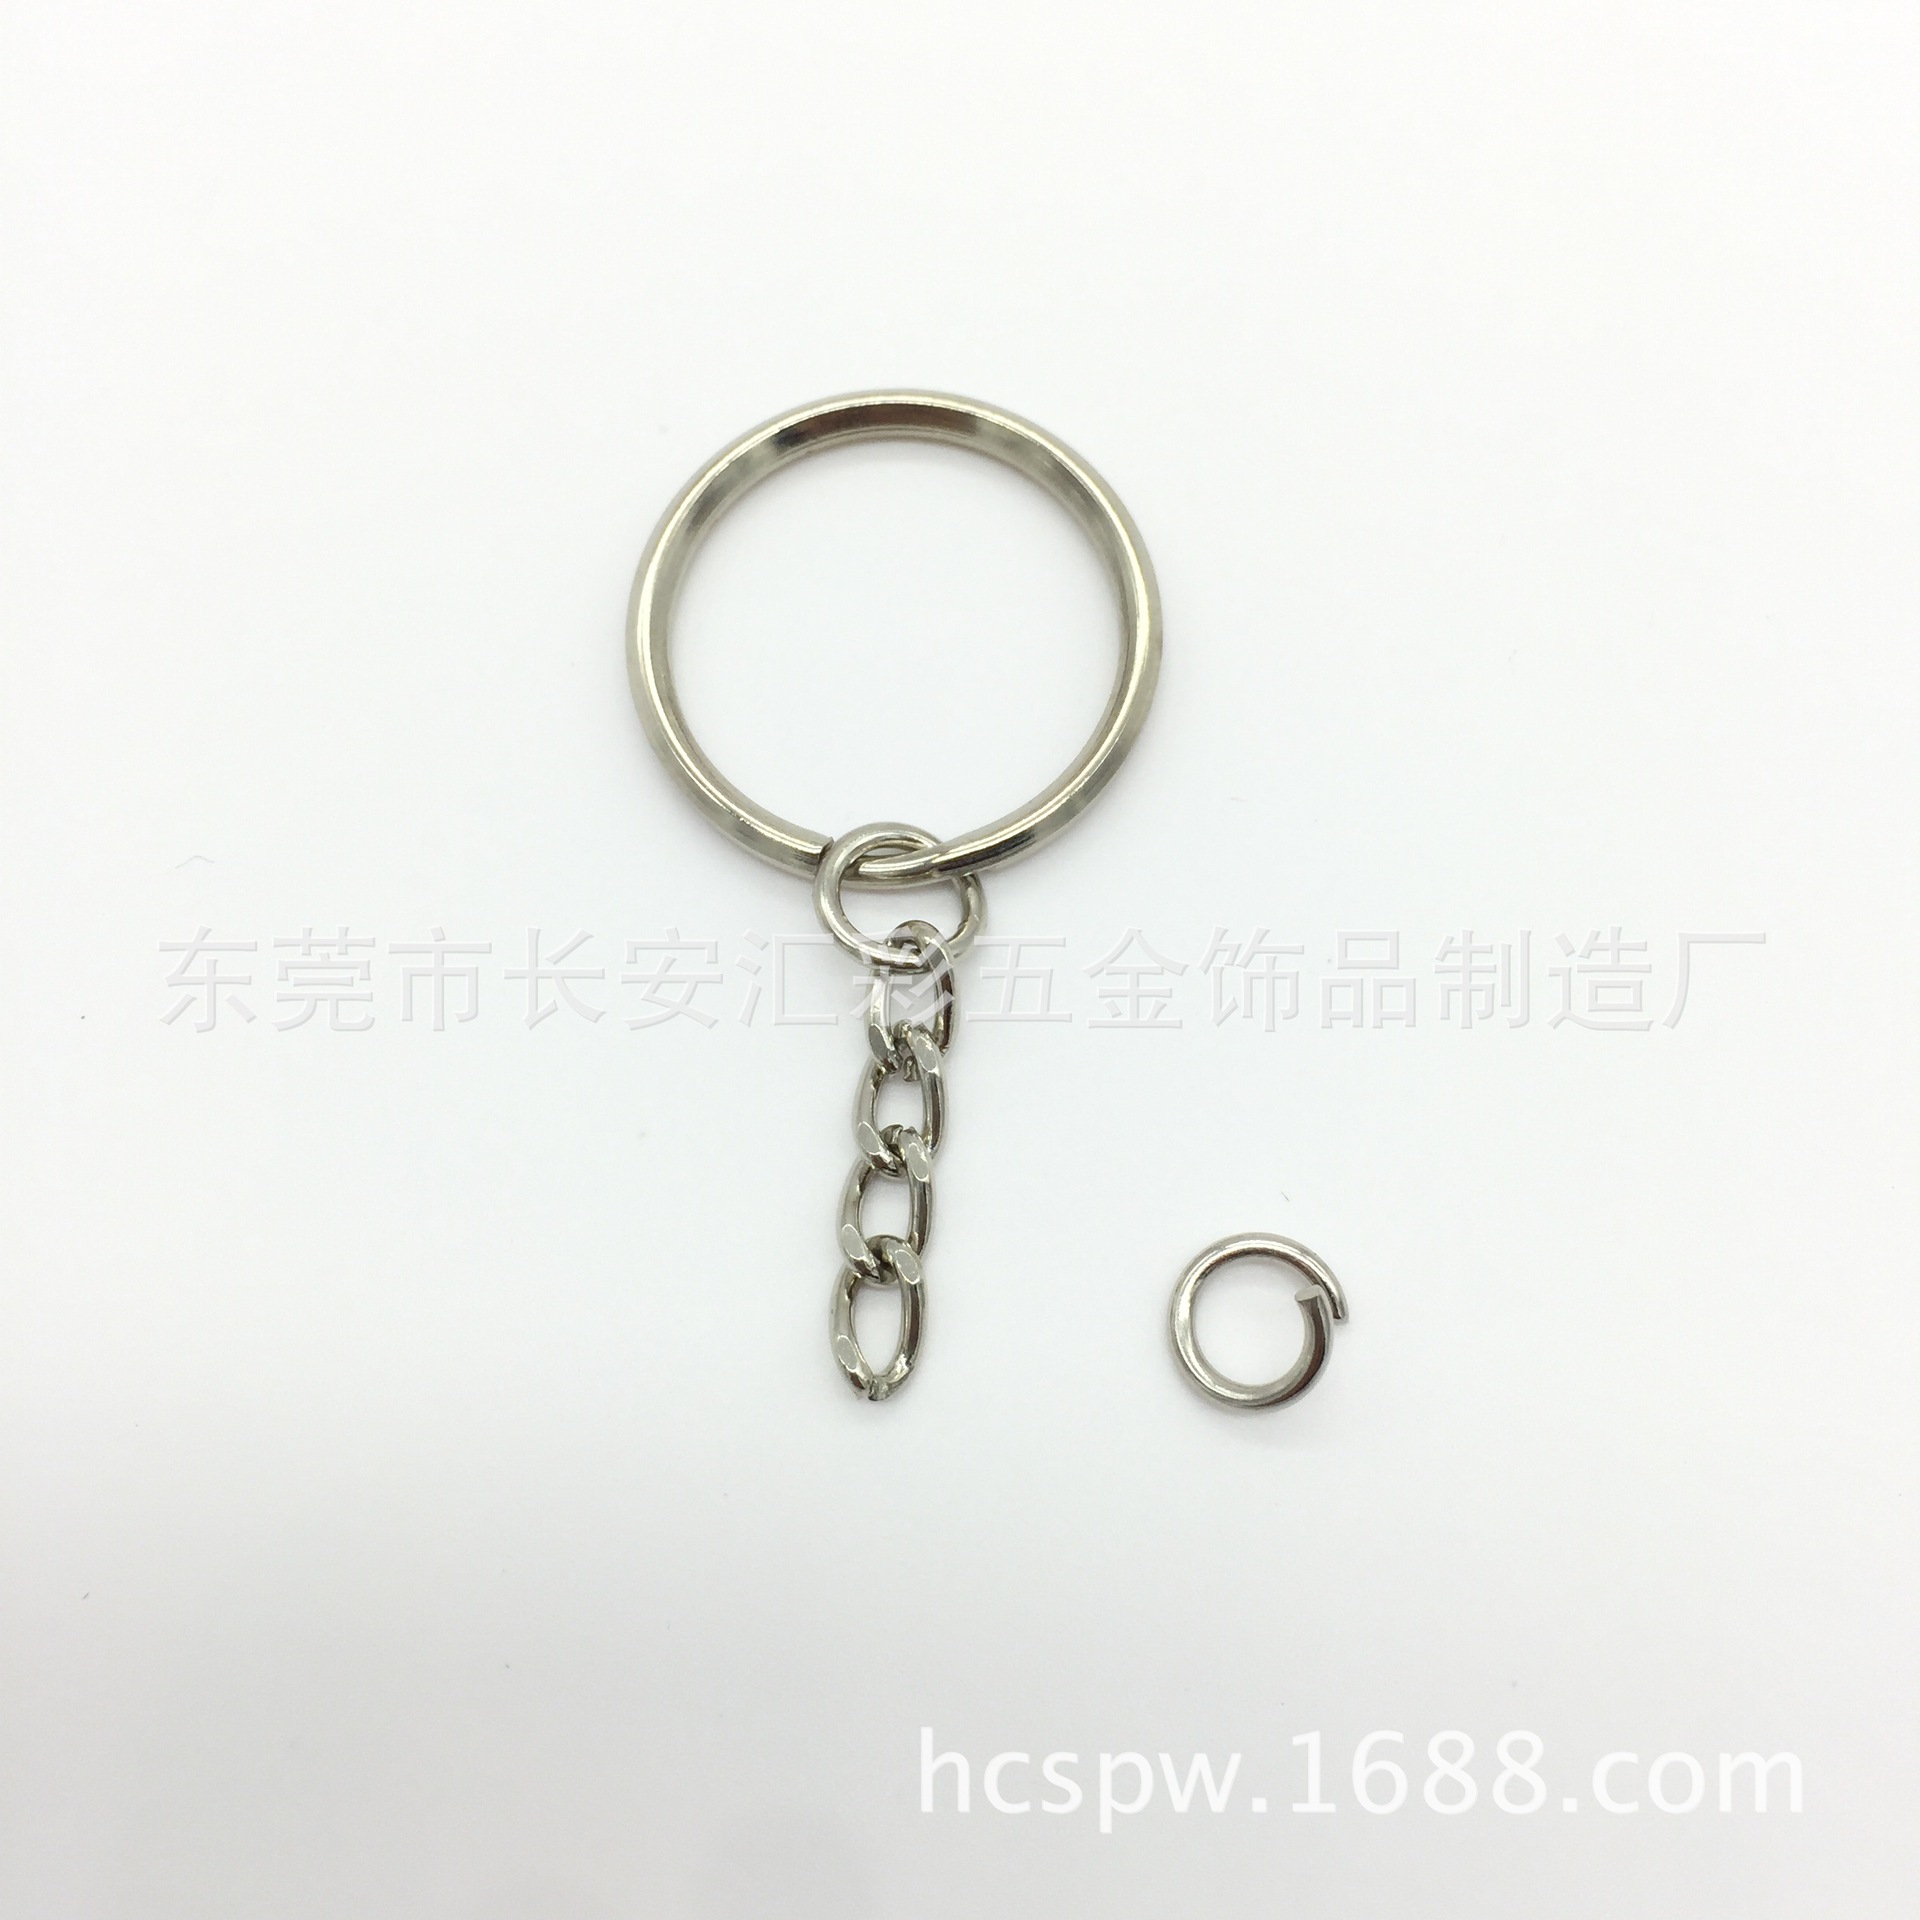 Dongguan Manufacturers Supply All Kinds of Key Ring with Chain Key Chain Aperture with Chain